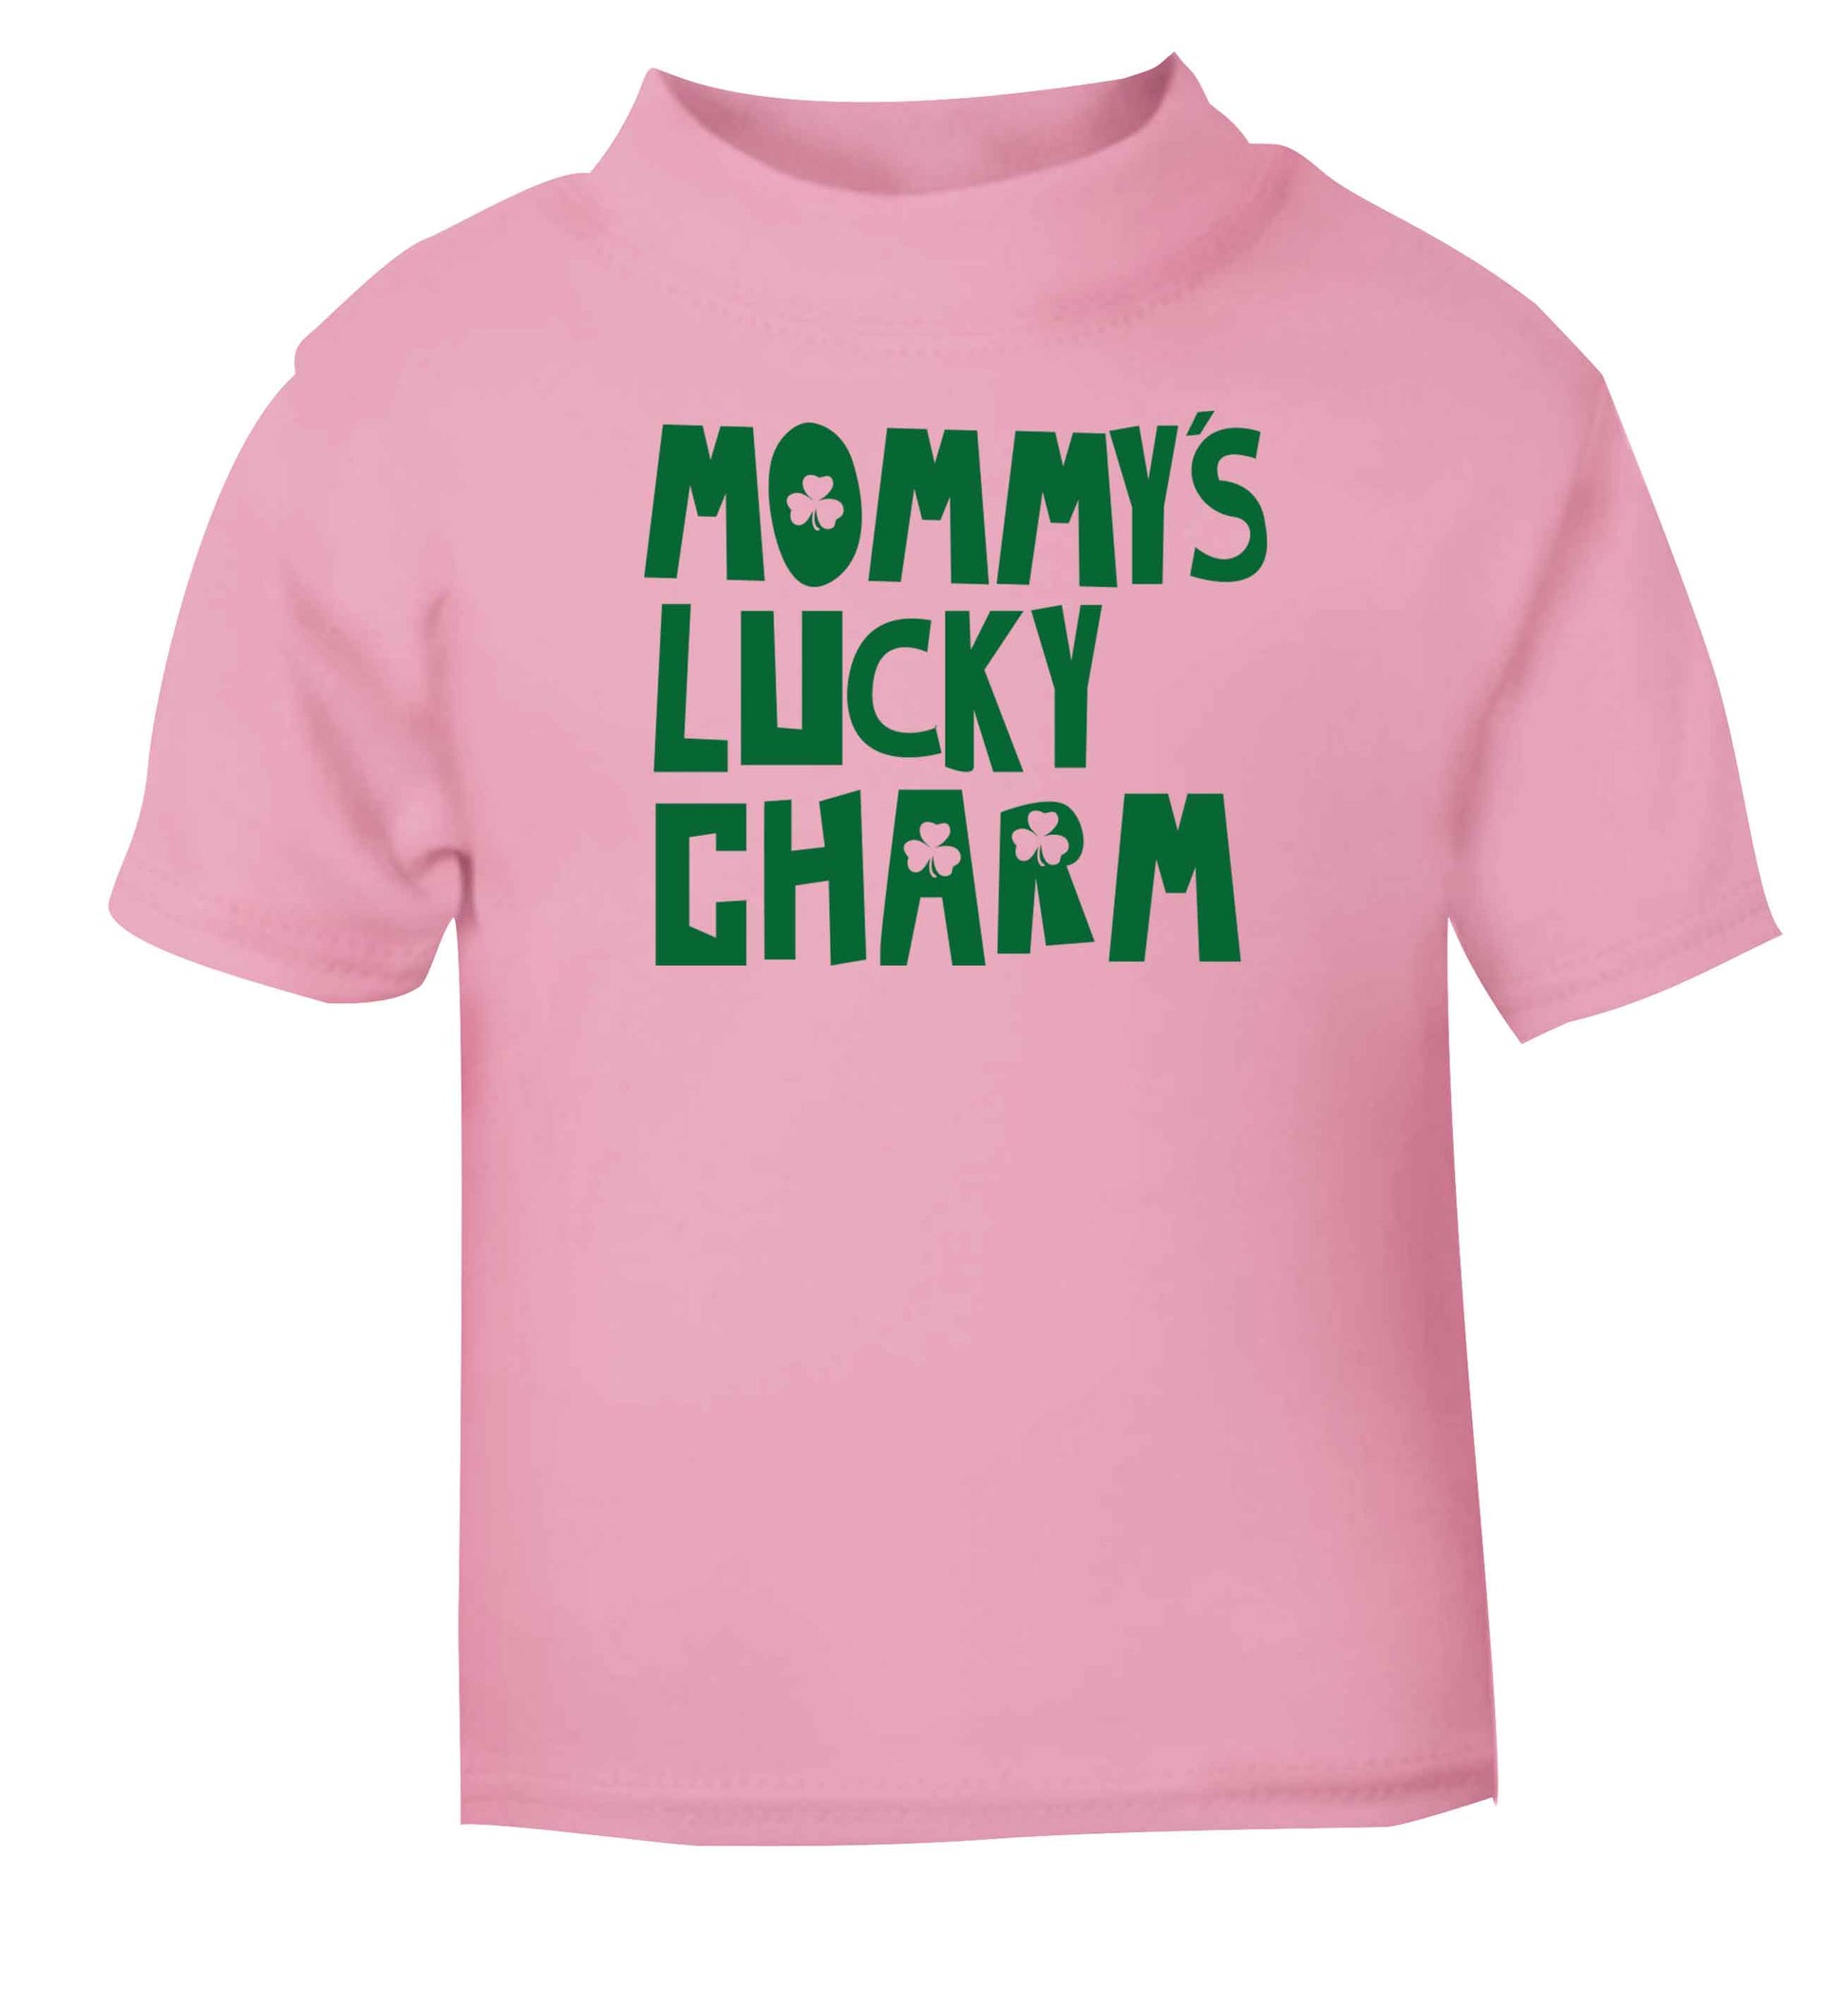 Mommy's lucky charm Children's light pink Tshirt 12-13 Years